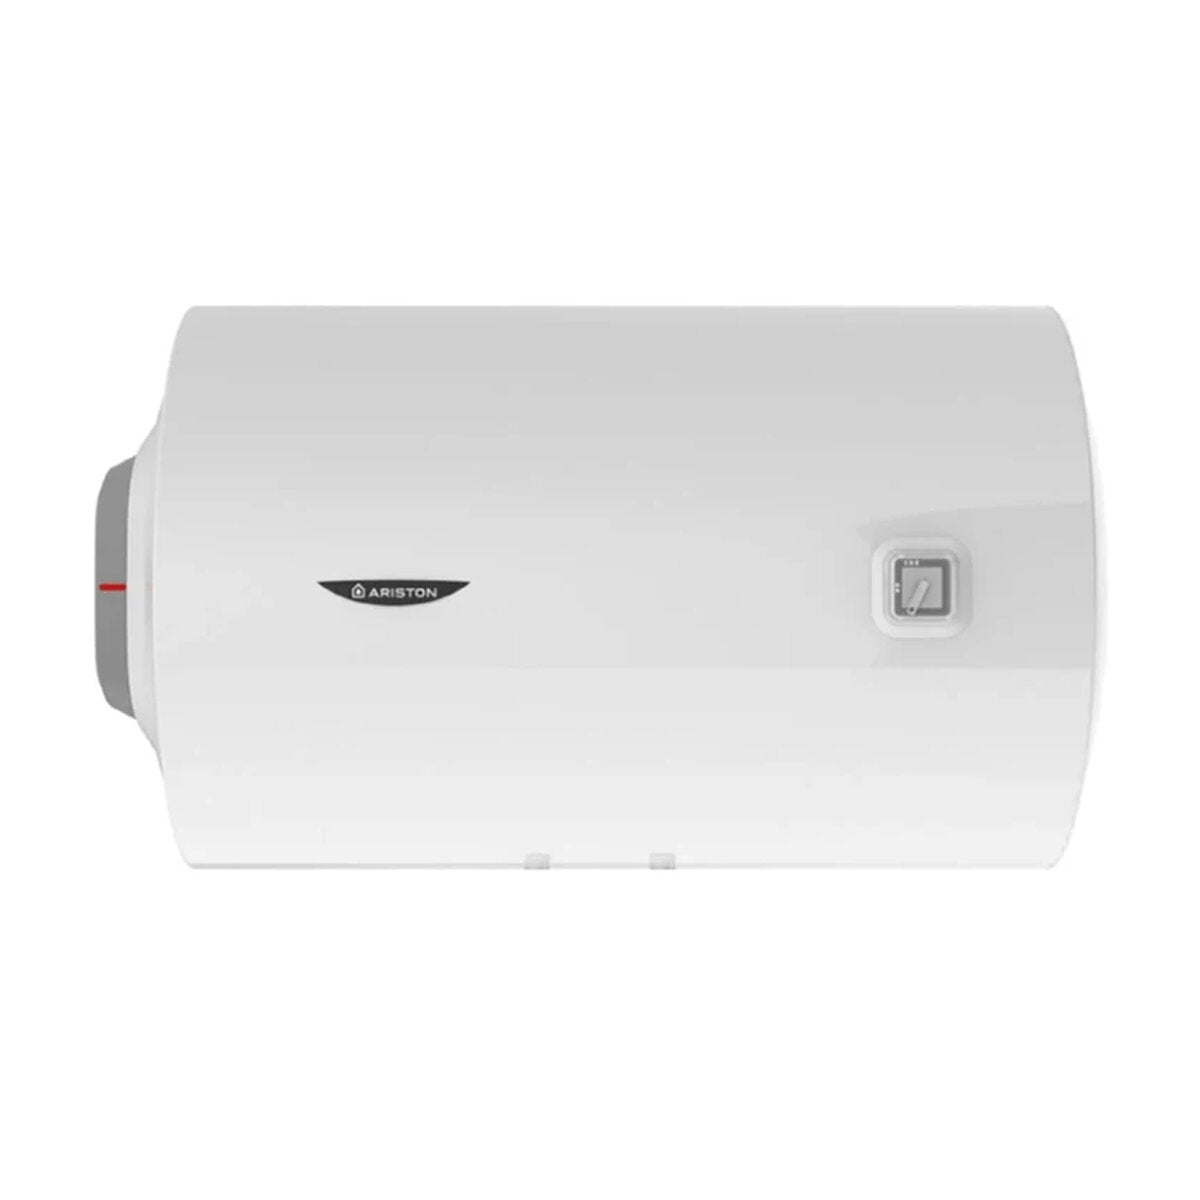 Ariston Pro1 R Horizontal Electric Water Heater 100 litres